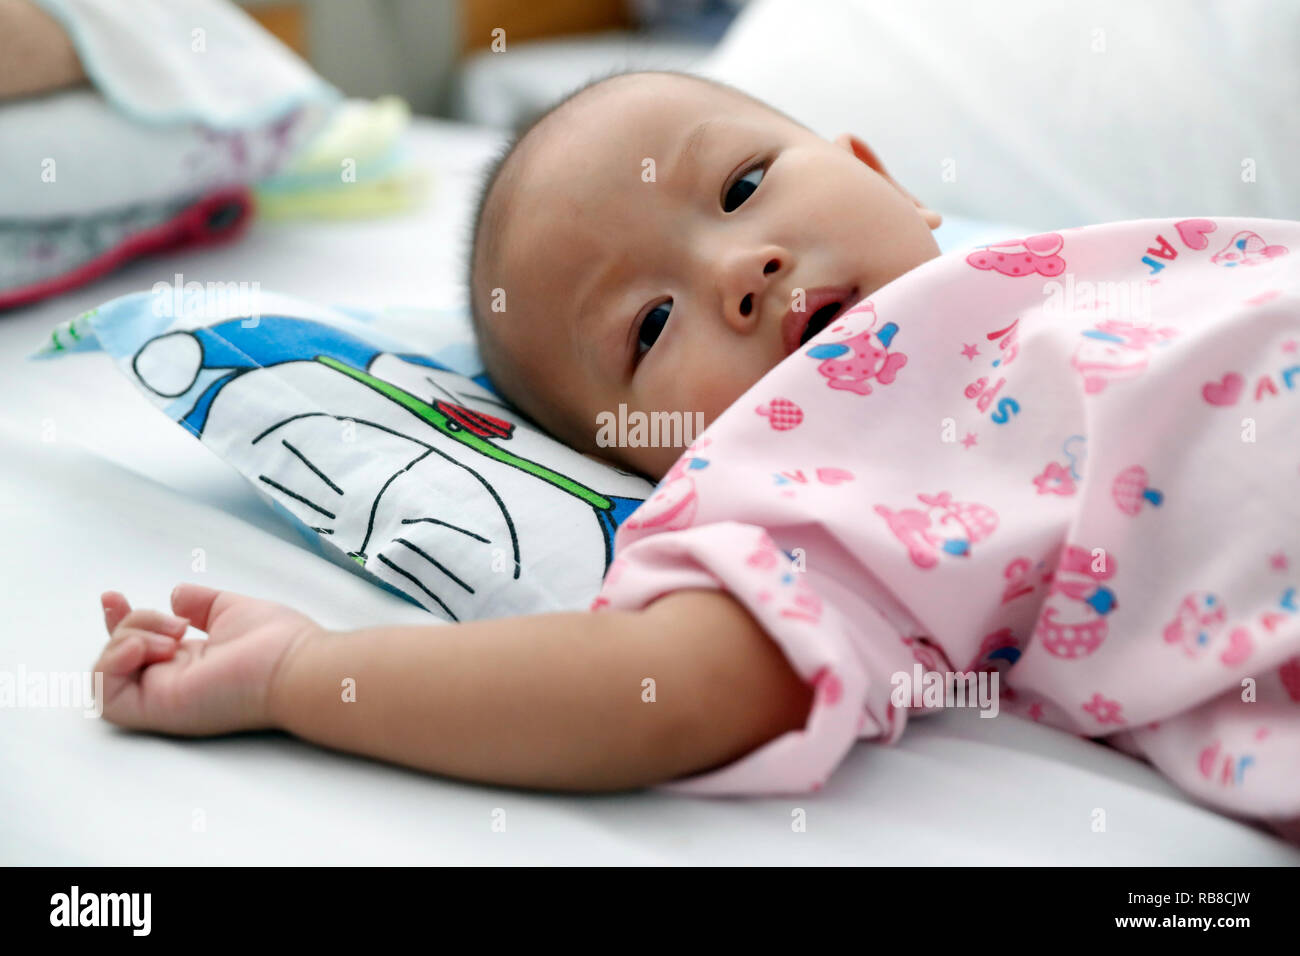 Tam Duc Cardiology Hospital. Child suffering of heart disease. Ho Chi Minh City. Vietnam. Stock Photo